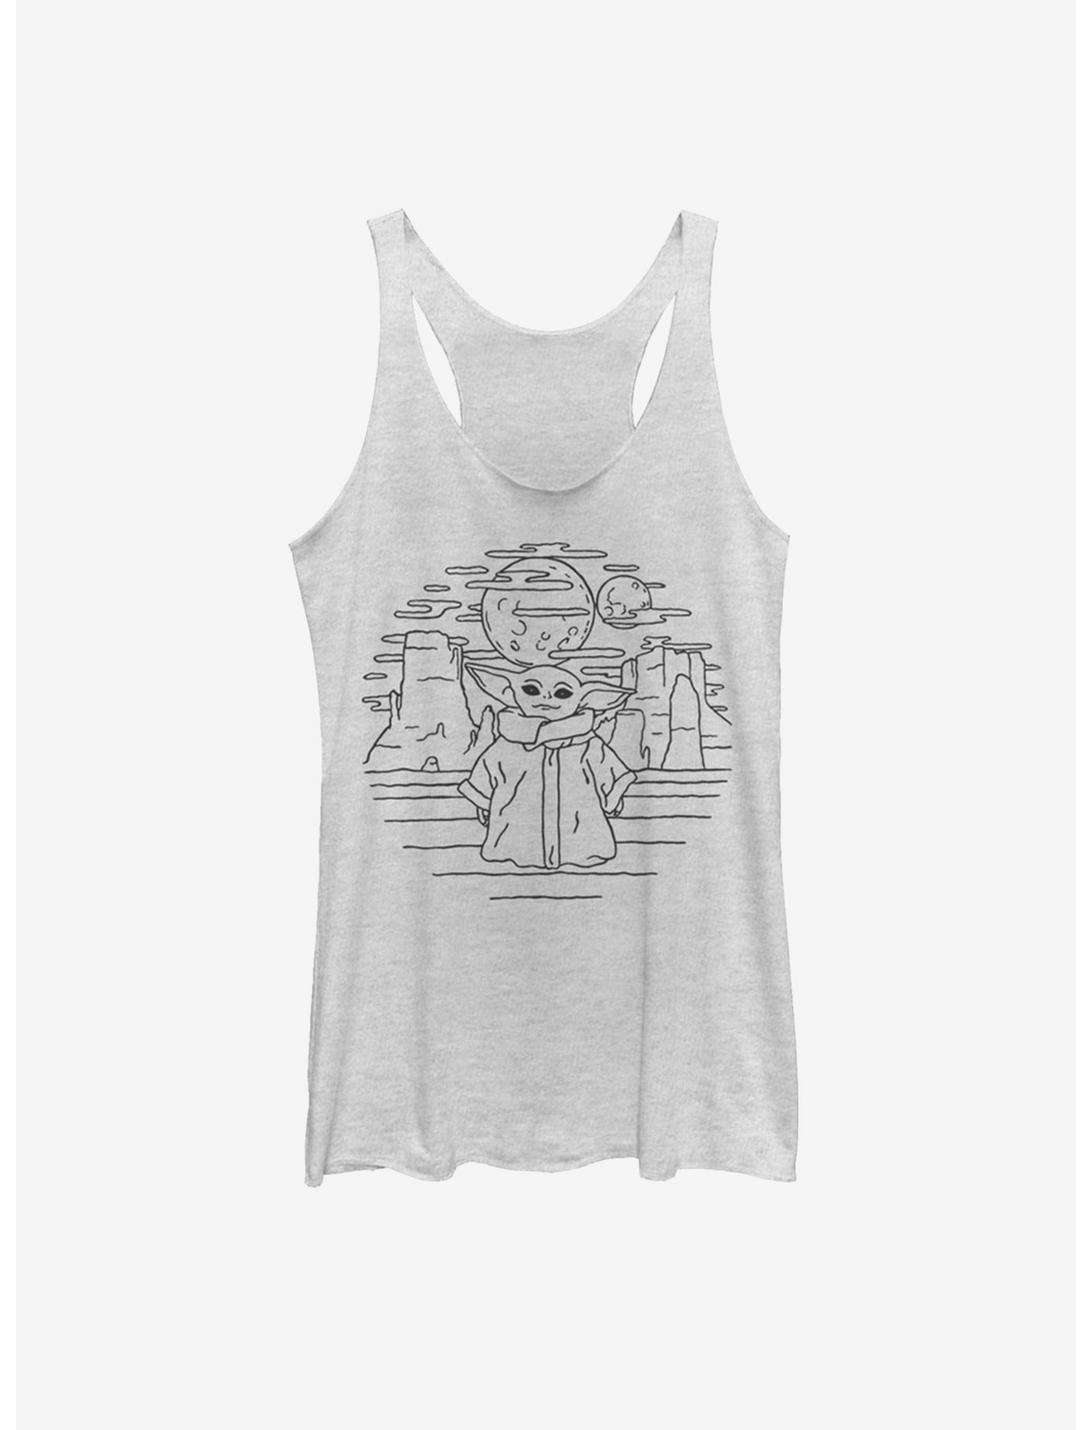 Star Wars The Mandalorian The Child Doodle Womens Tank Top, WHITE HTR, hi-res